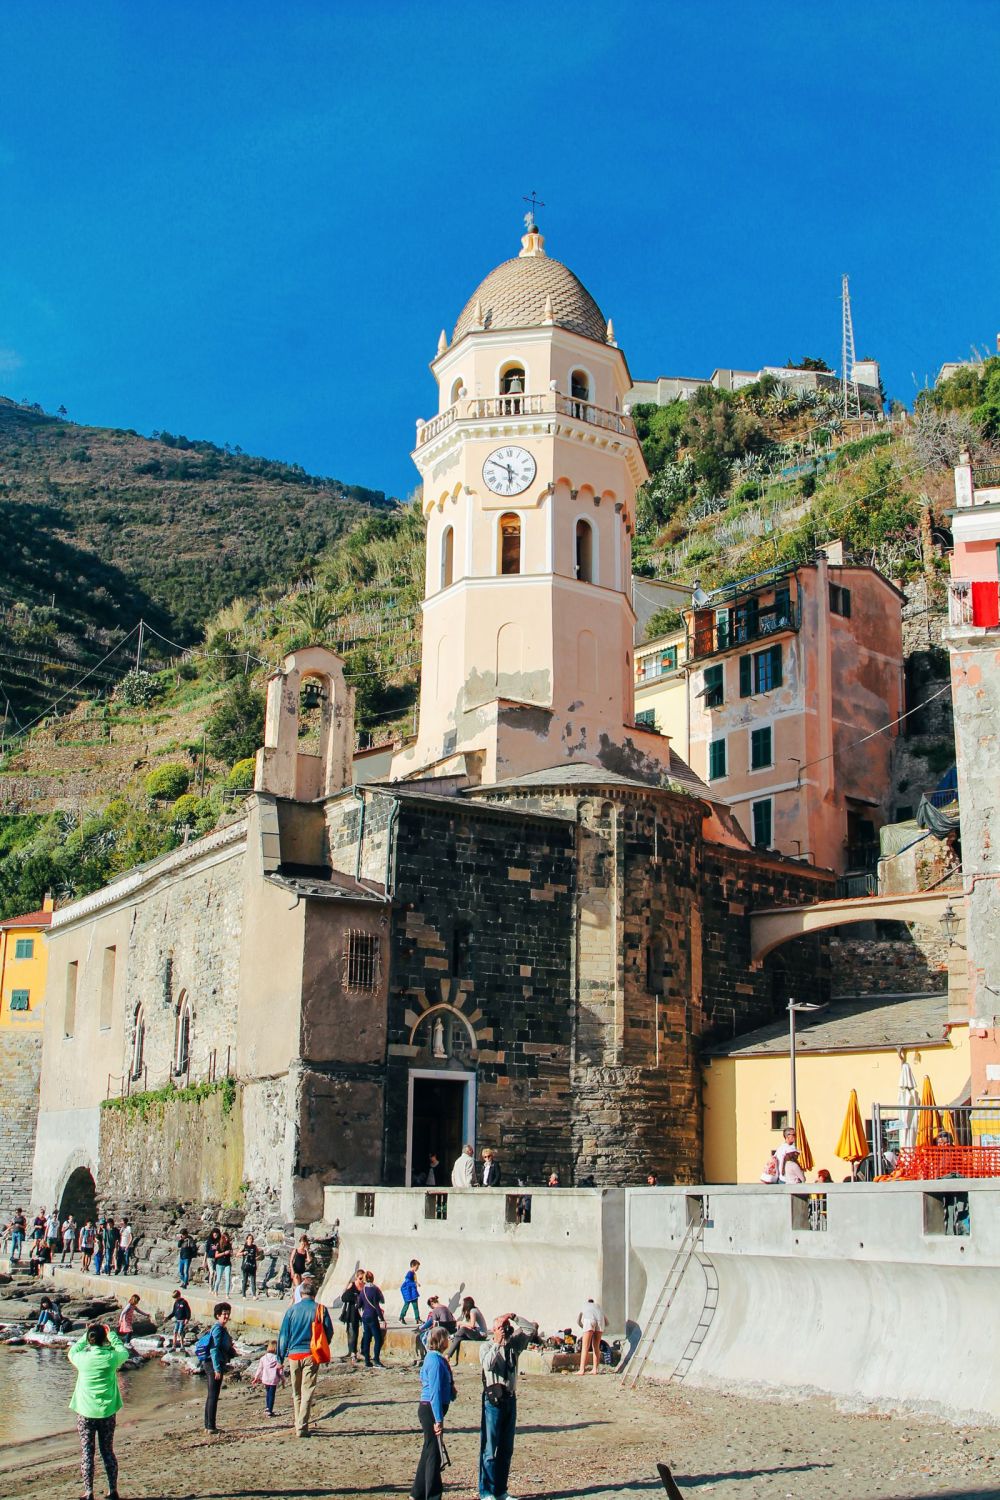 Vernazza in Cinque Terre, Italy - The Photo Diary! [4 of 5] (25)